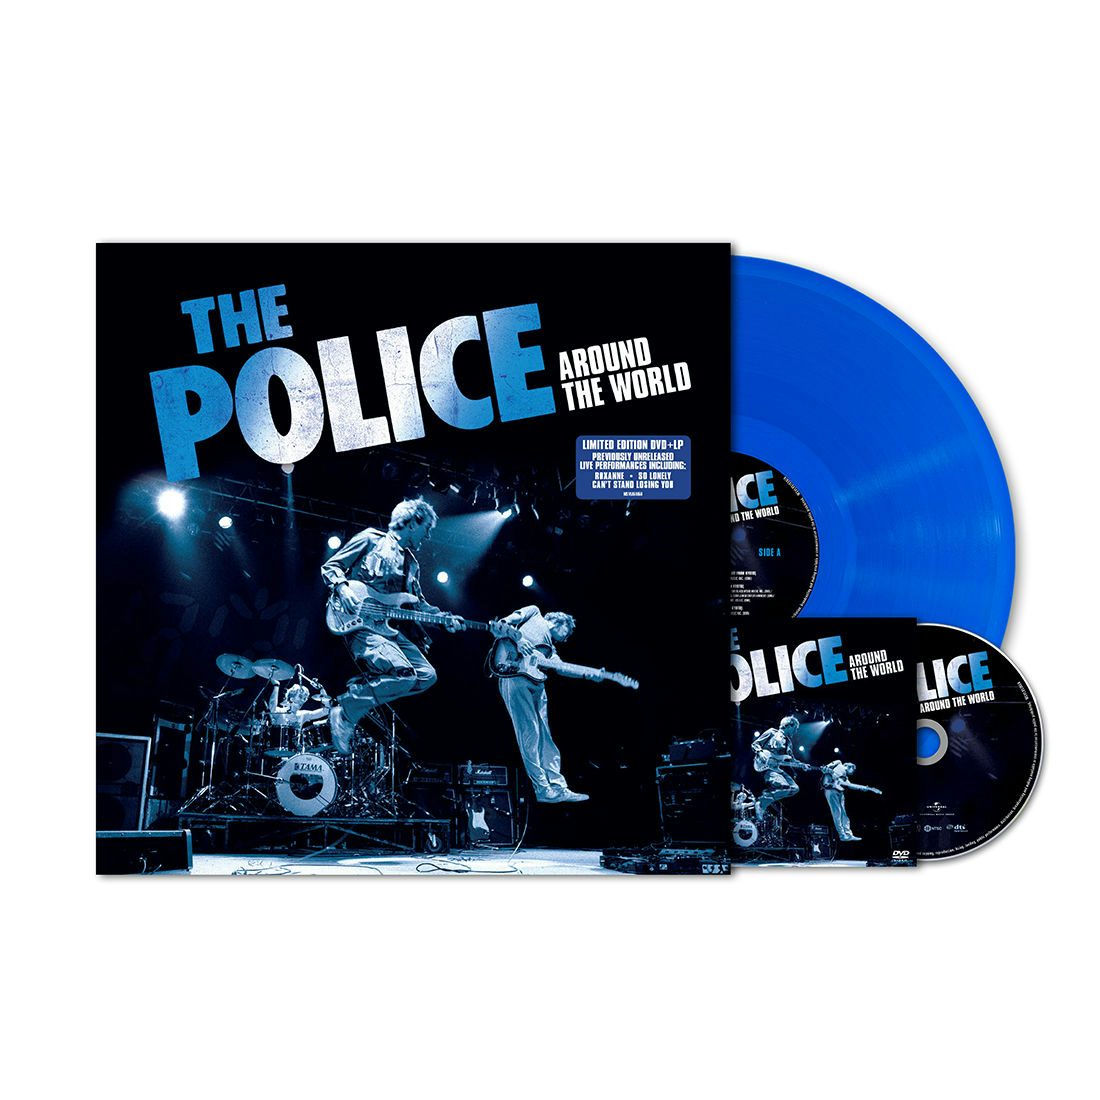 The Police Around The World: Restored & Expanded Ltd Blue LP/DVD